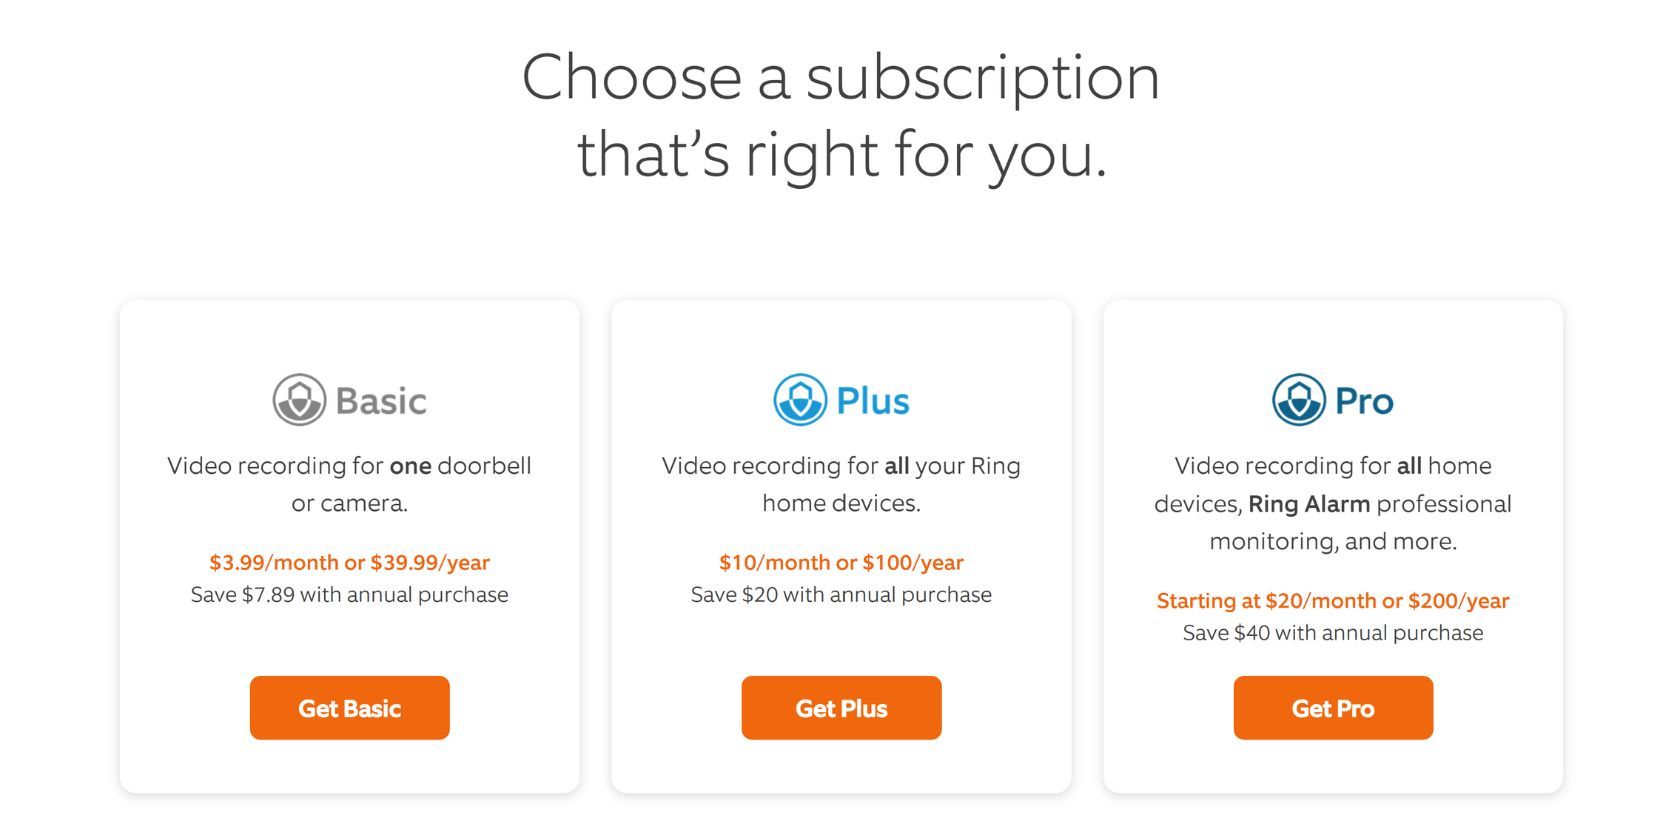 ring protect plan subscriptions compared, including basic, plus, and pro